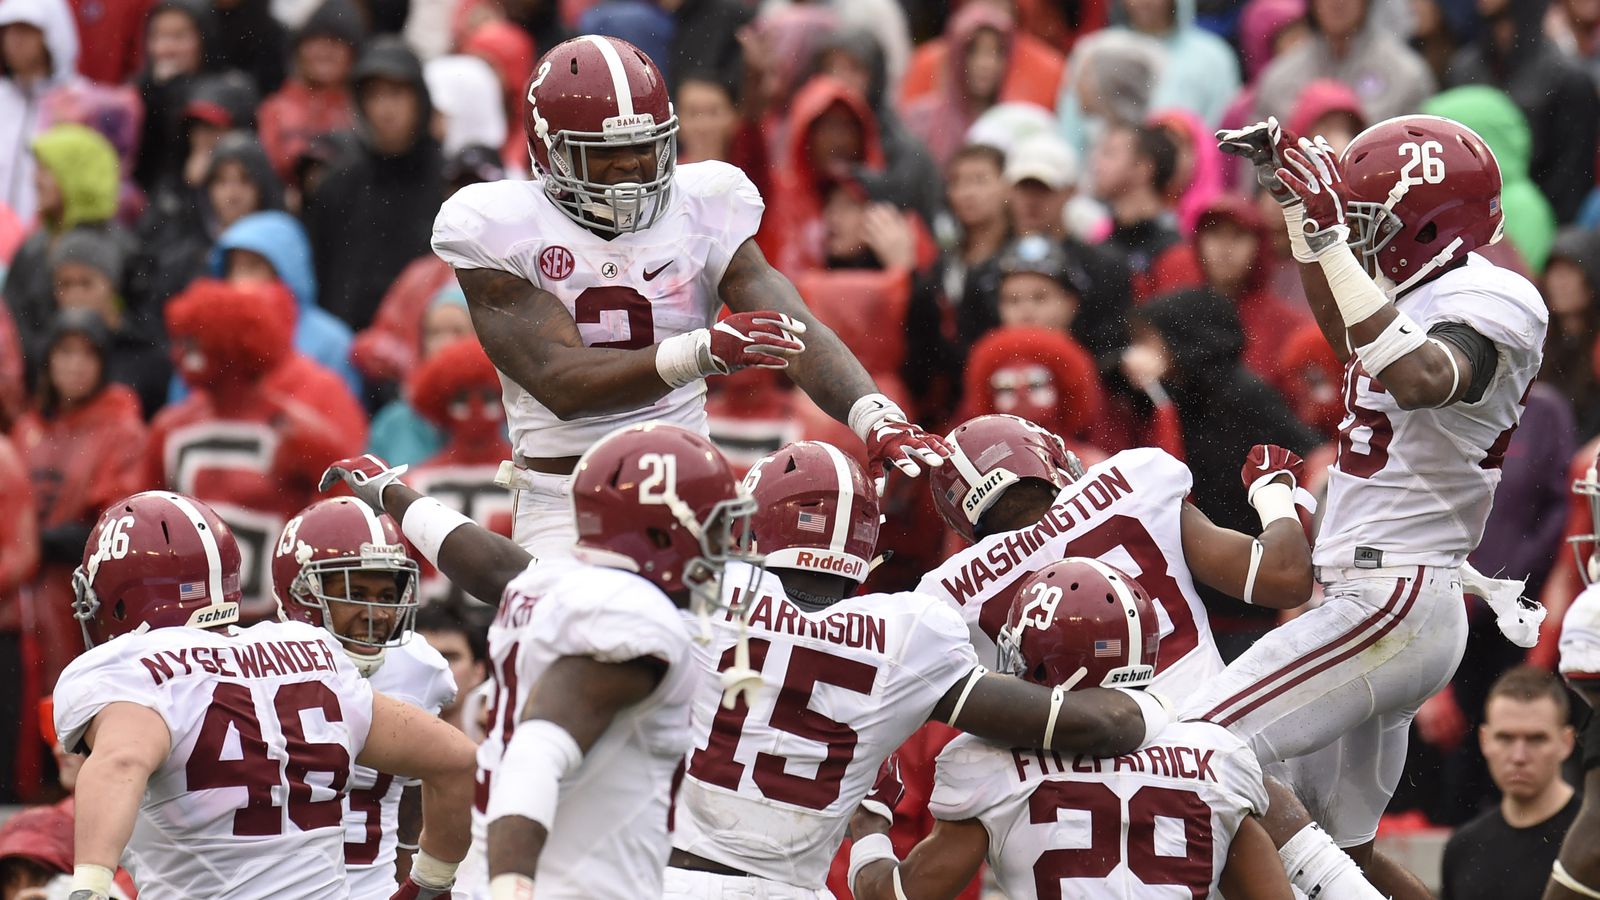 Alabama vs georgia final score plus things to know from the crimson tides